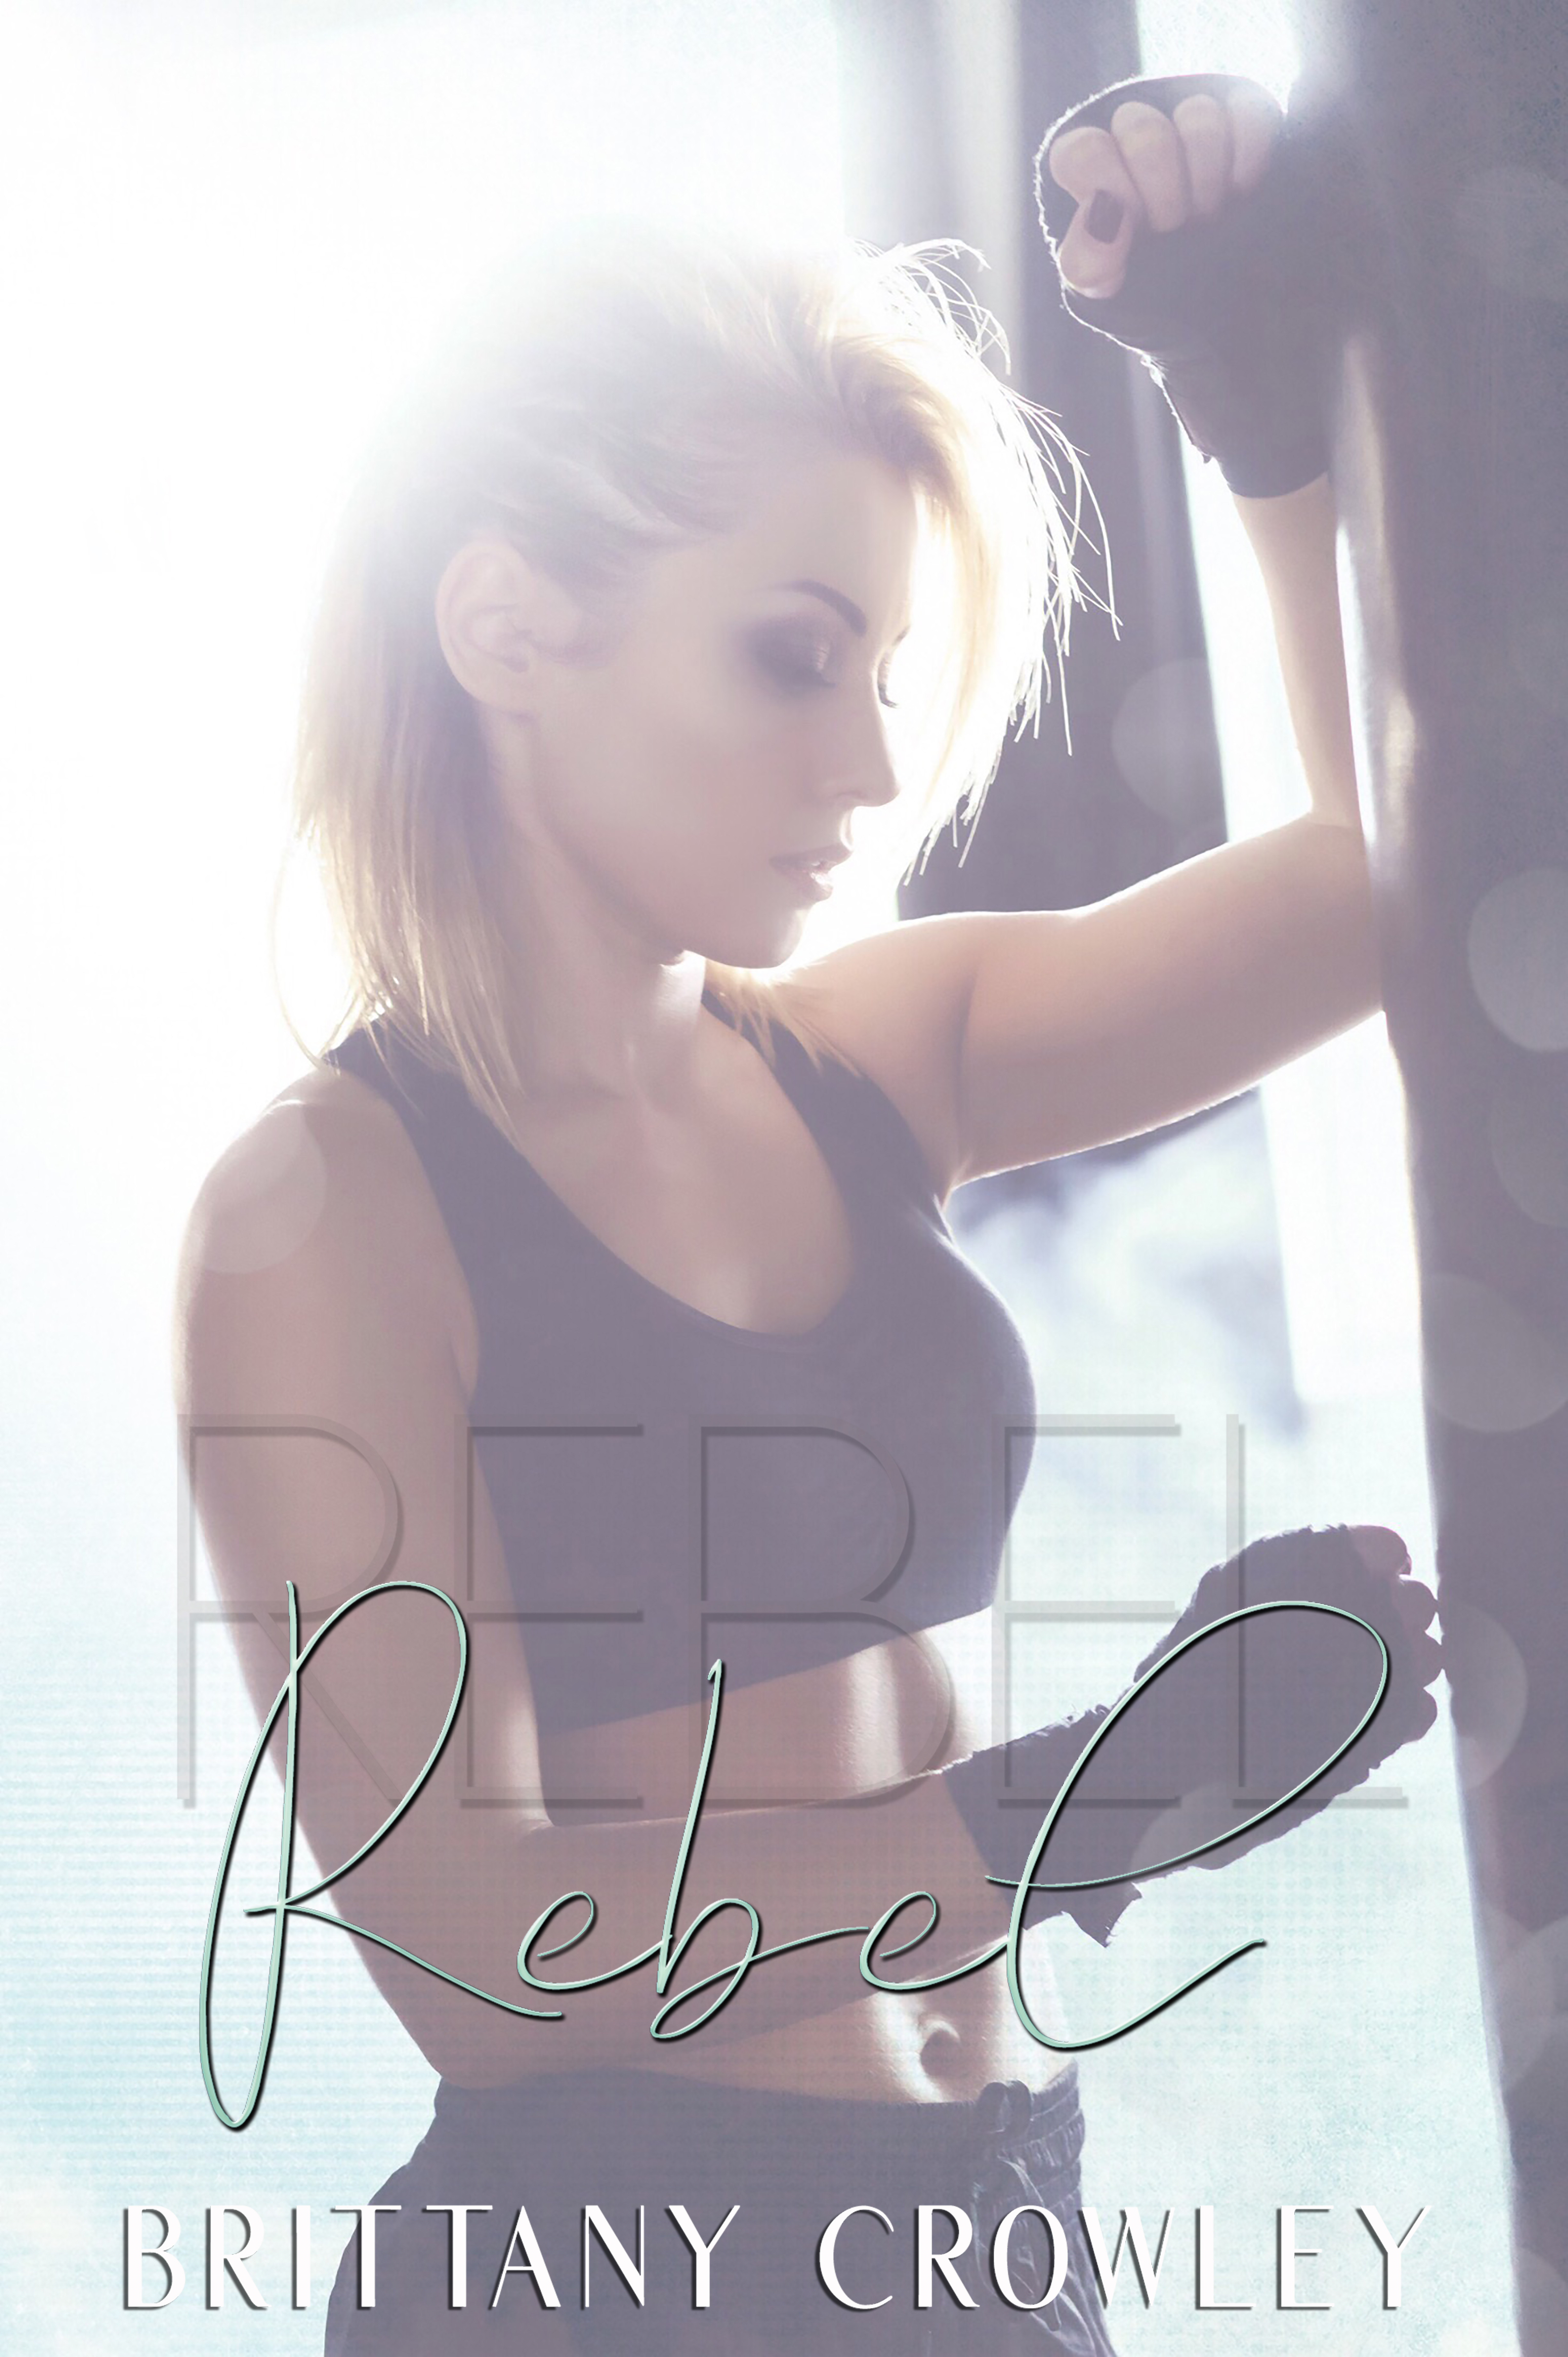 Rebel by Brittany Crowley [Release Blitz]